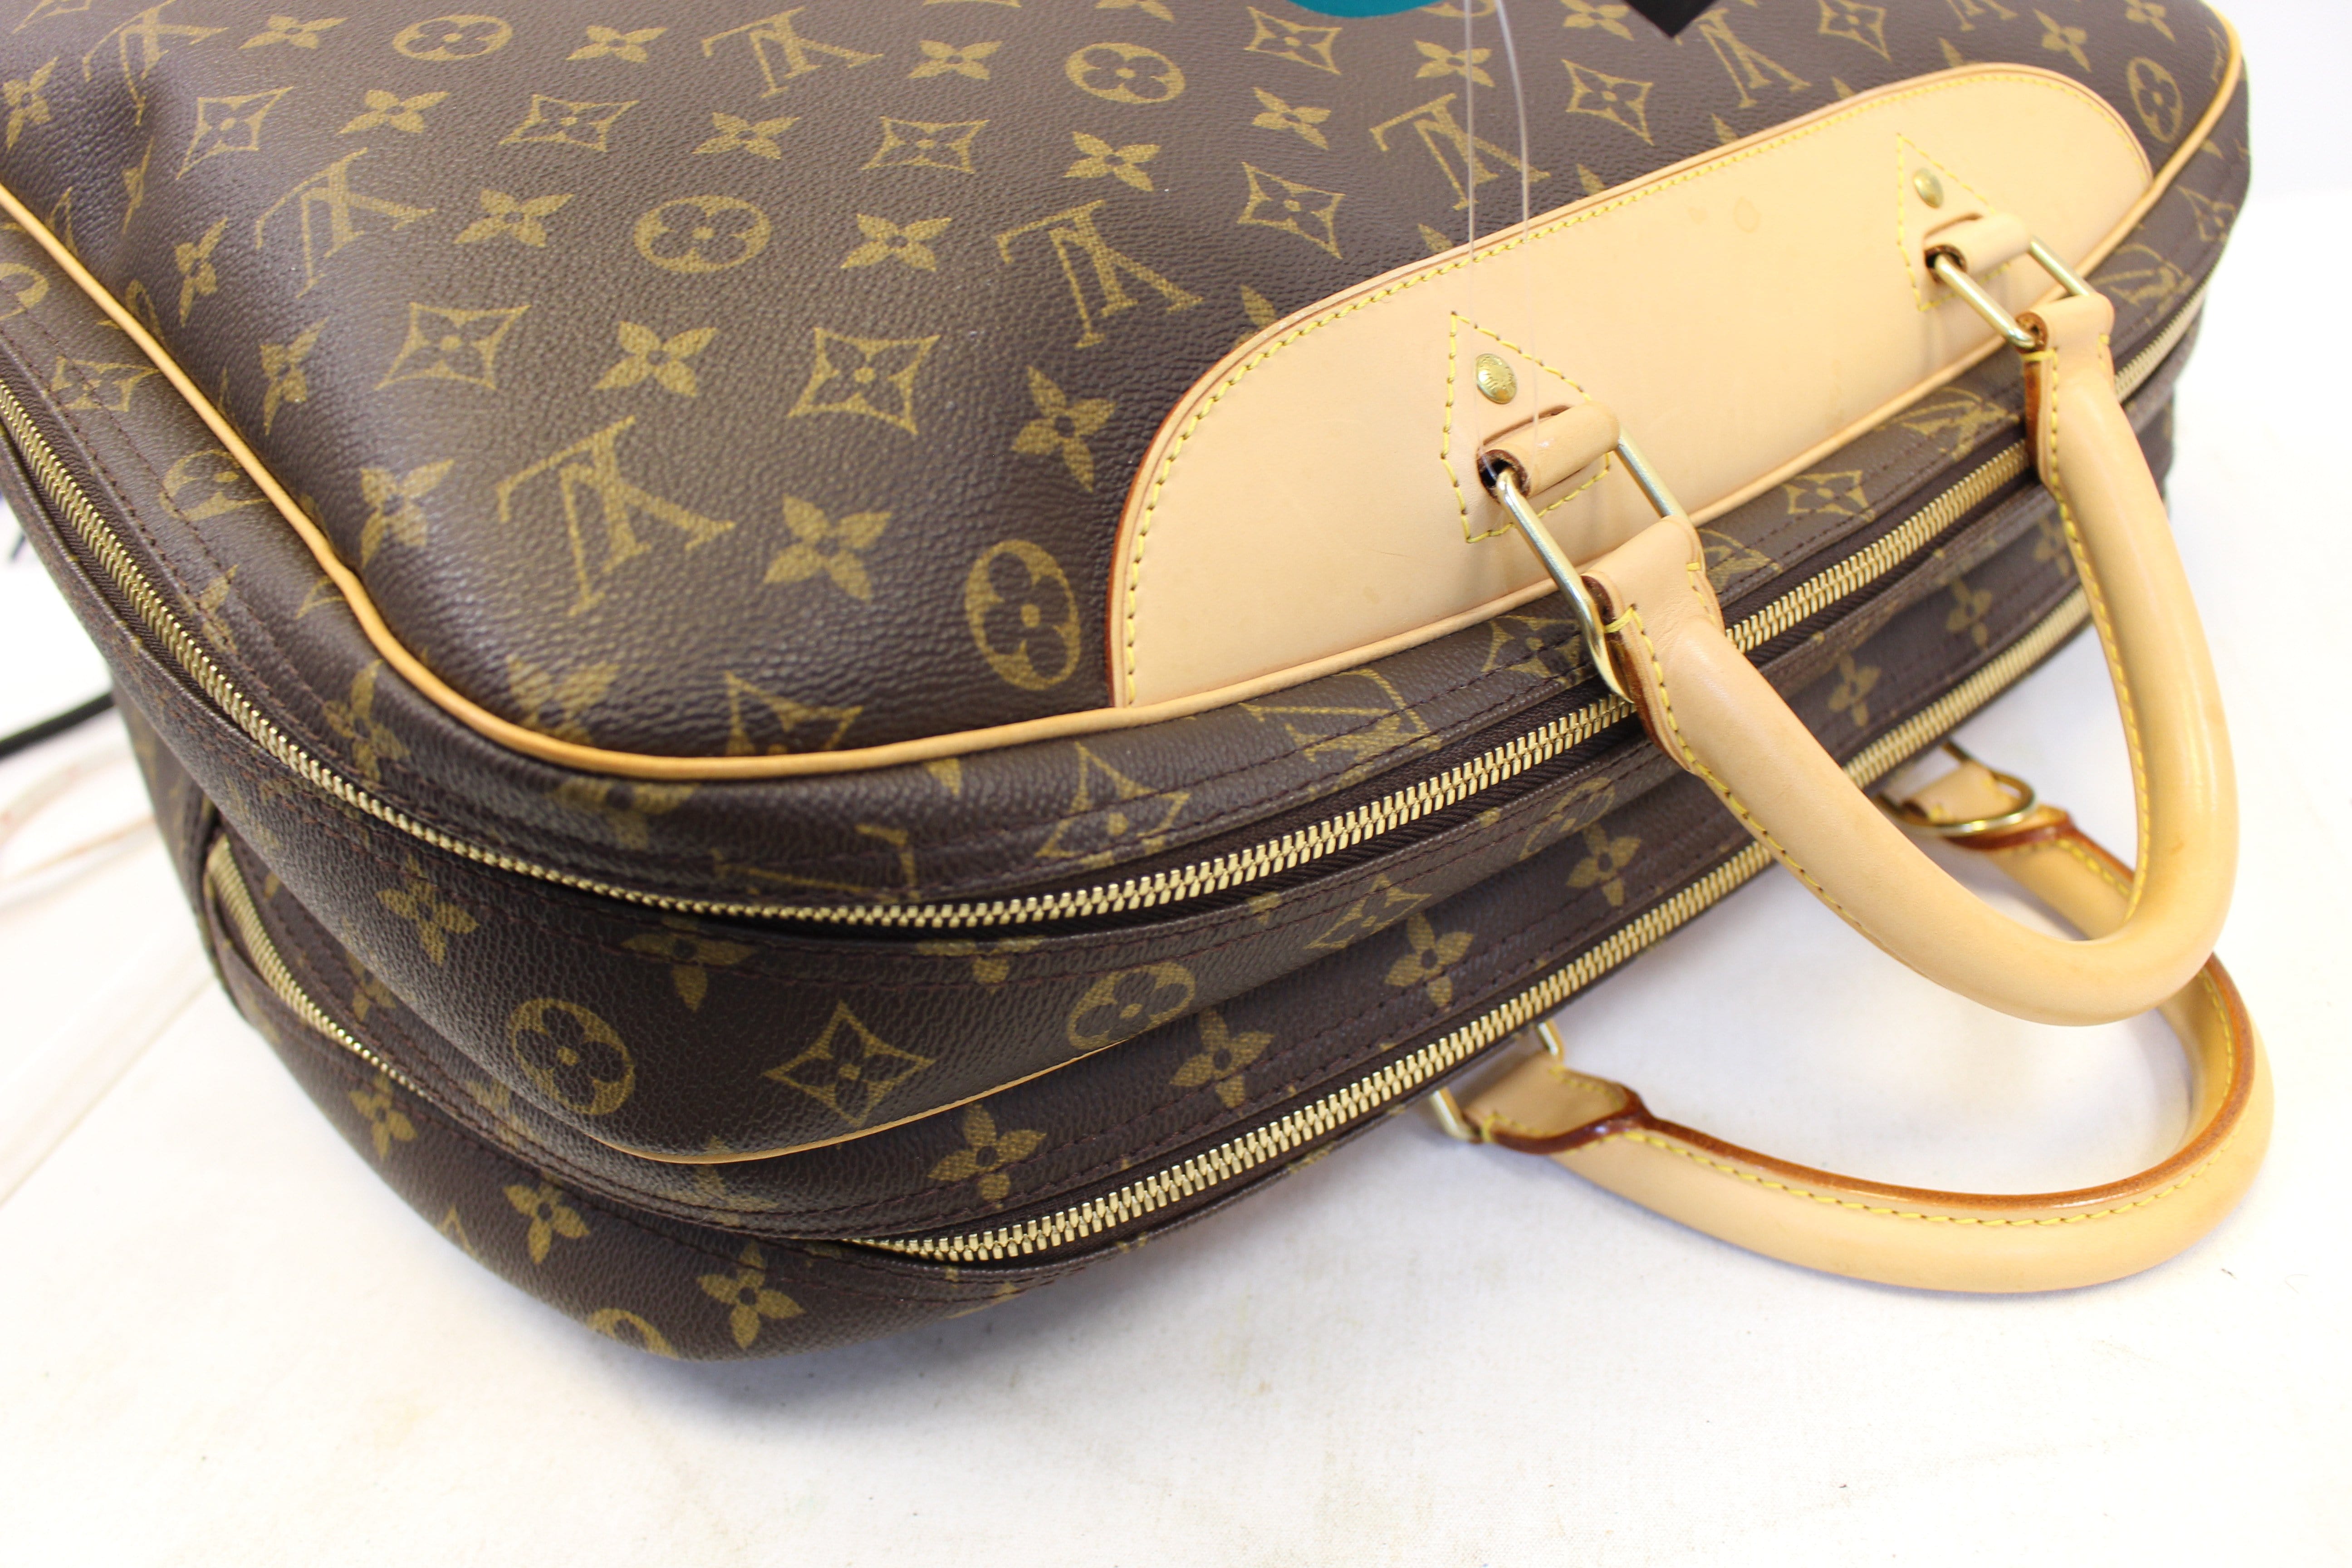 LOUIS VUITTON. Travel bag Alizé in Monogram coated can…